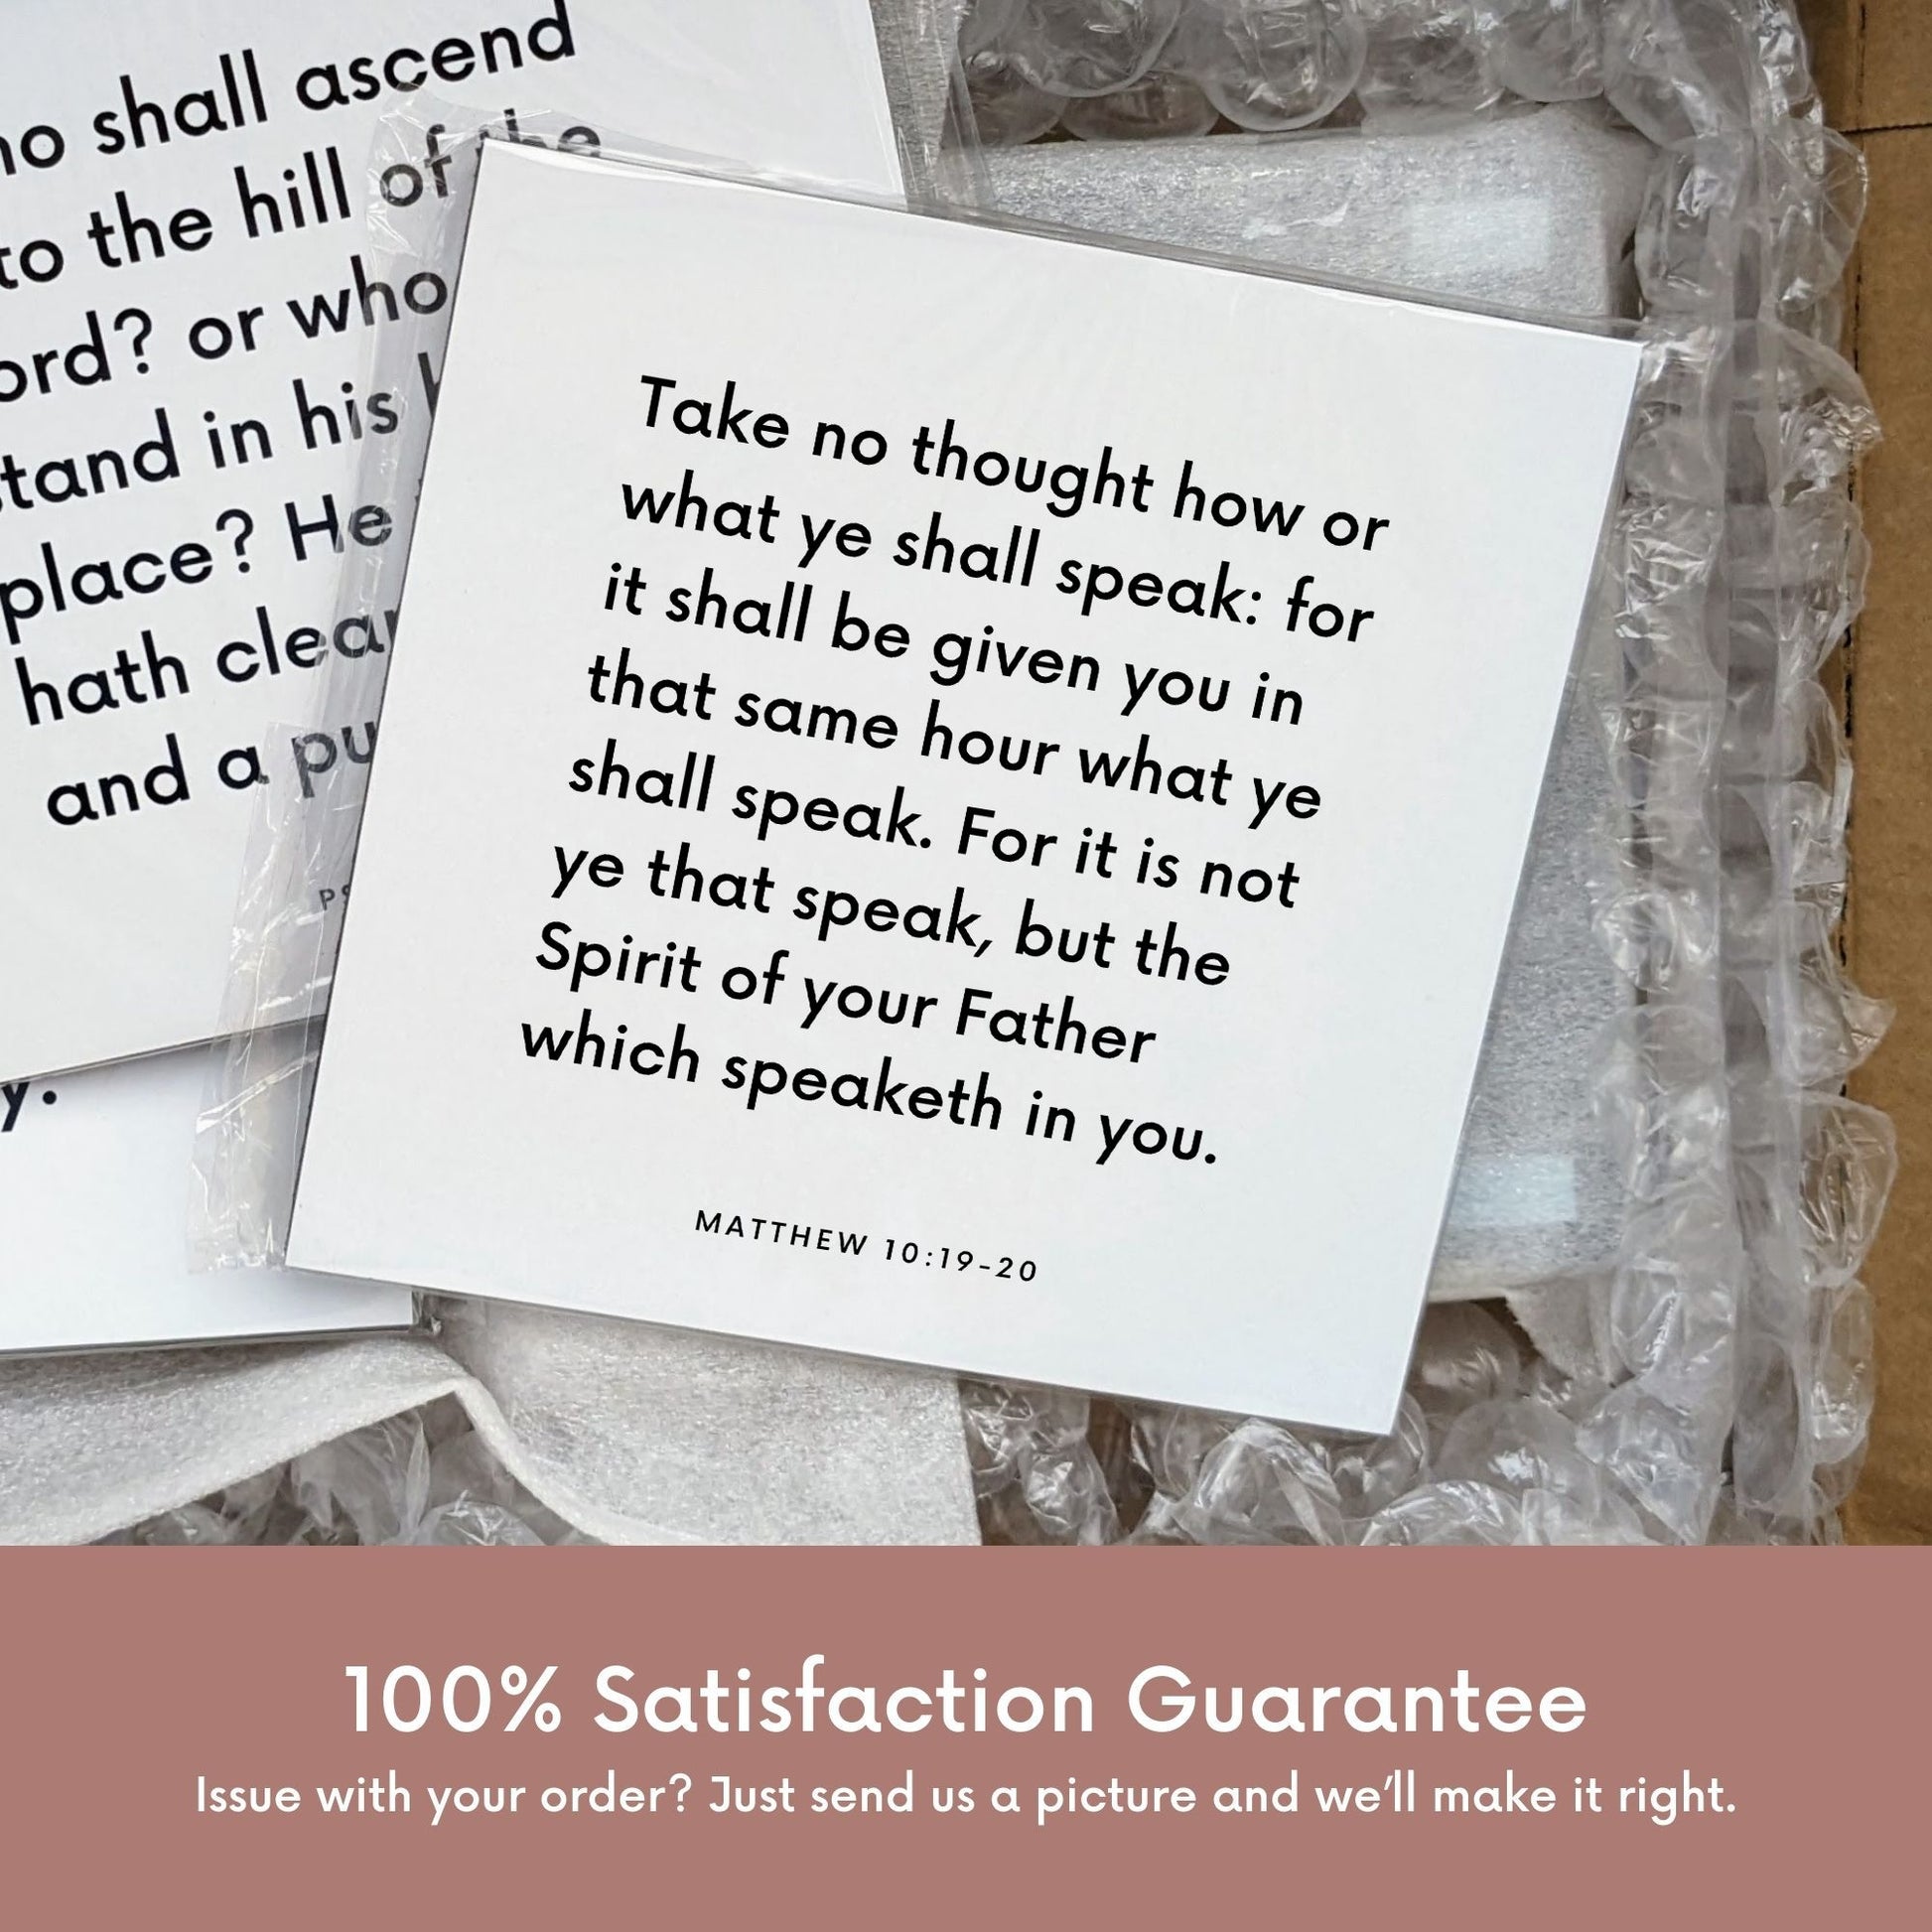 Shipping materials for scripture tile of Matthew 10:19-20 - "Take no thought how or what ye shall speak"